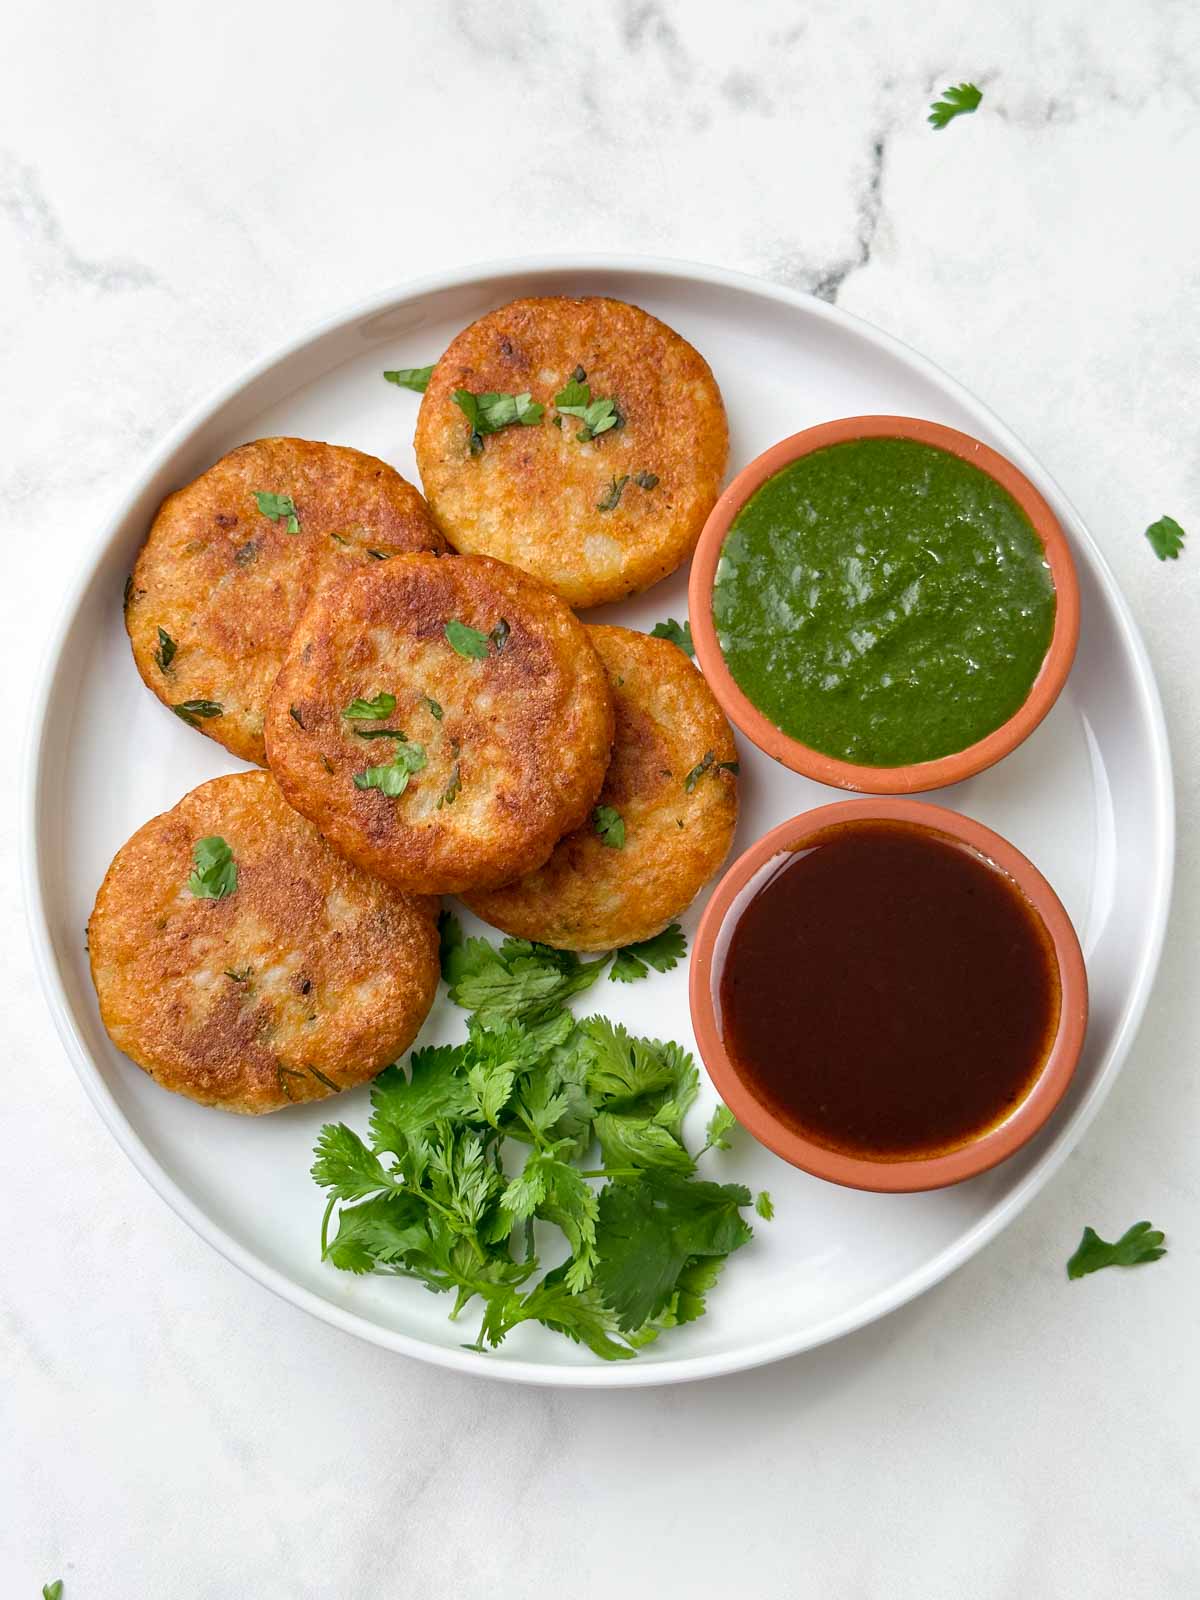 aloo tikki recipe served on a plate with green and tamarind chutney on the side